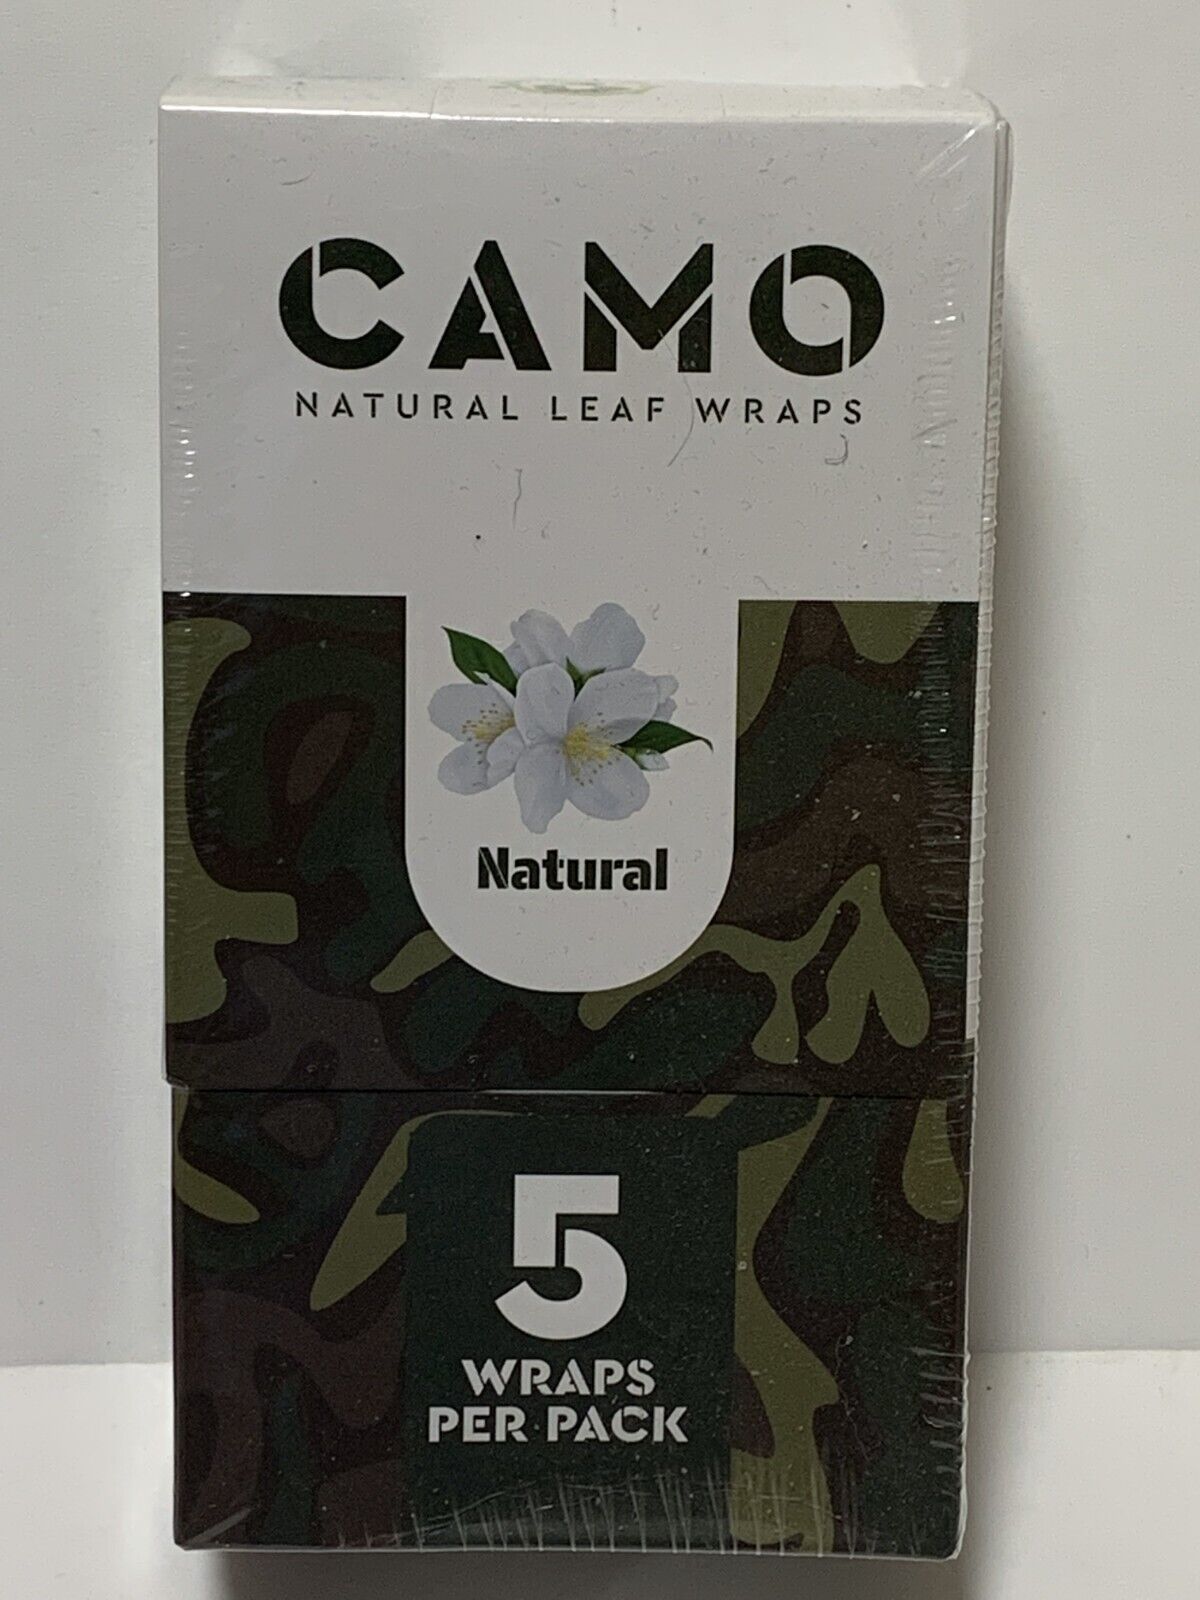 CAMO Self-Rolling Natural Leaf Wraps 125mm wraps - NATURAL Flavor (Full Box)